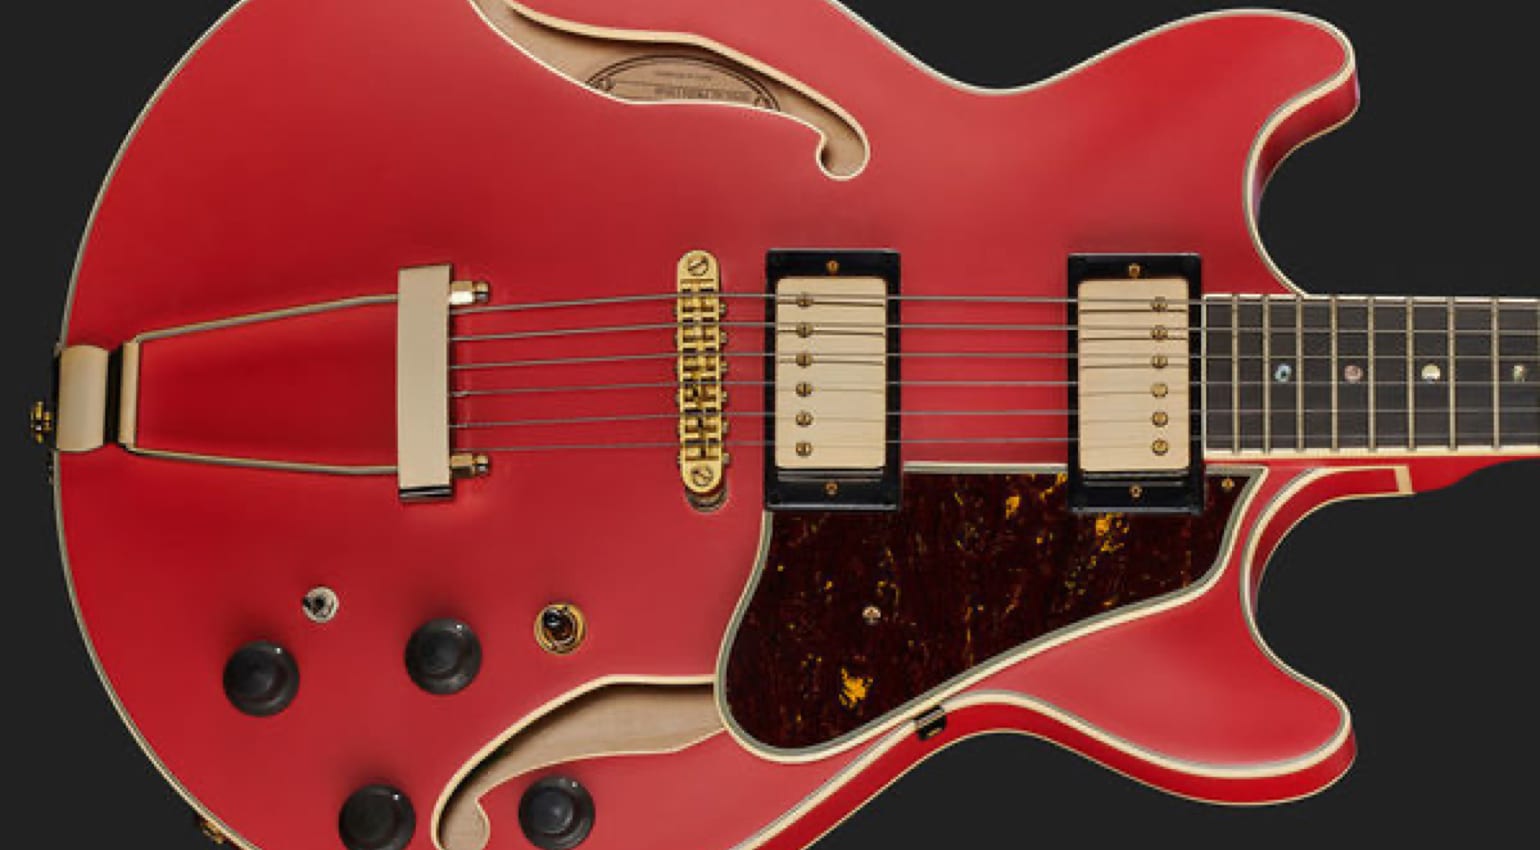 Ibanez Artcore Expressionist AMH90: a hollow body with Tri-Sound tones